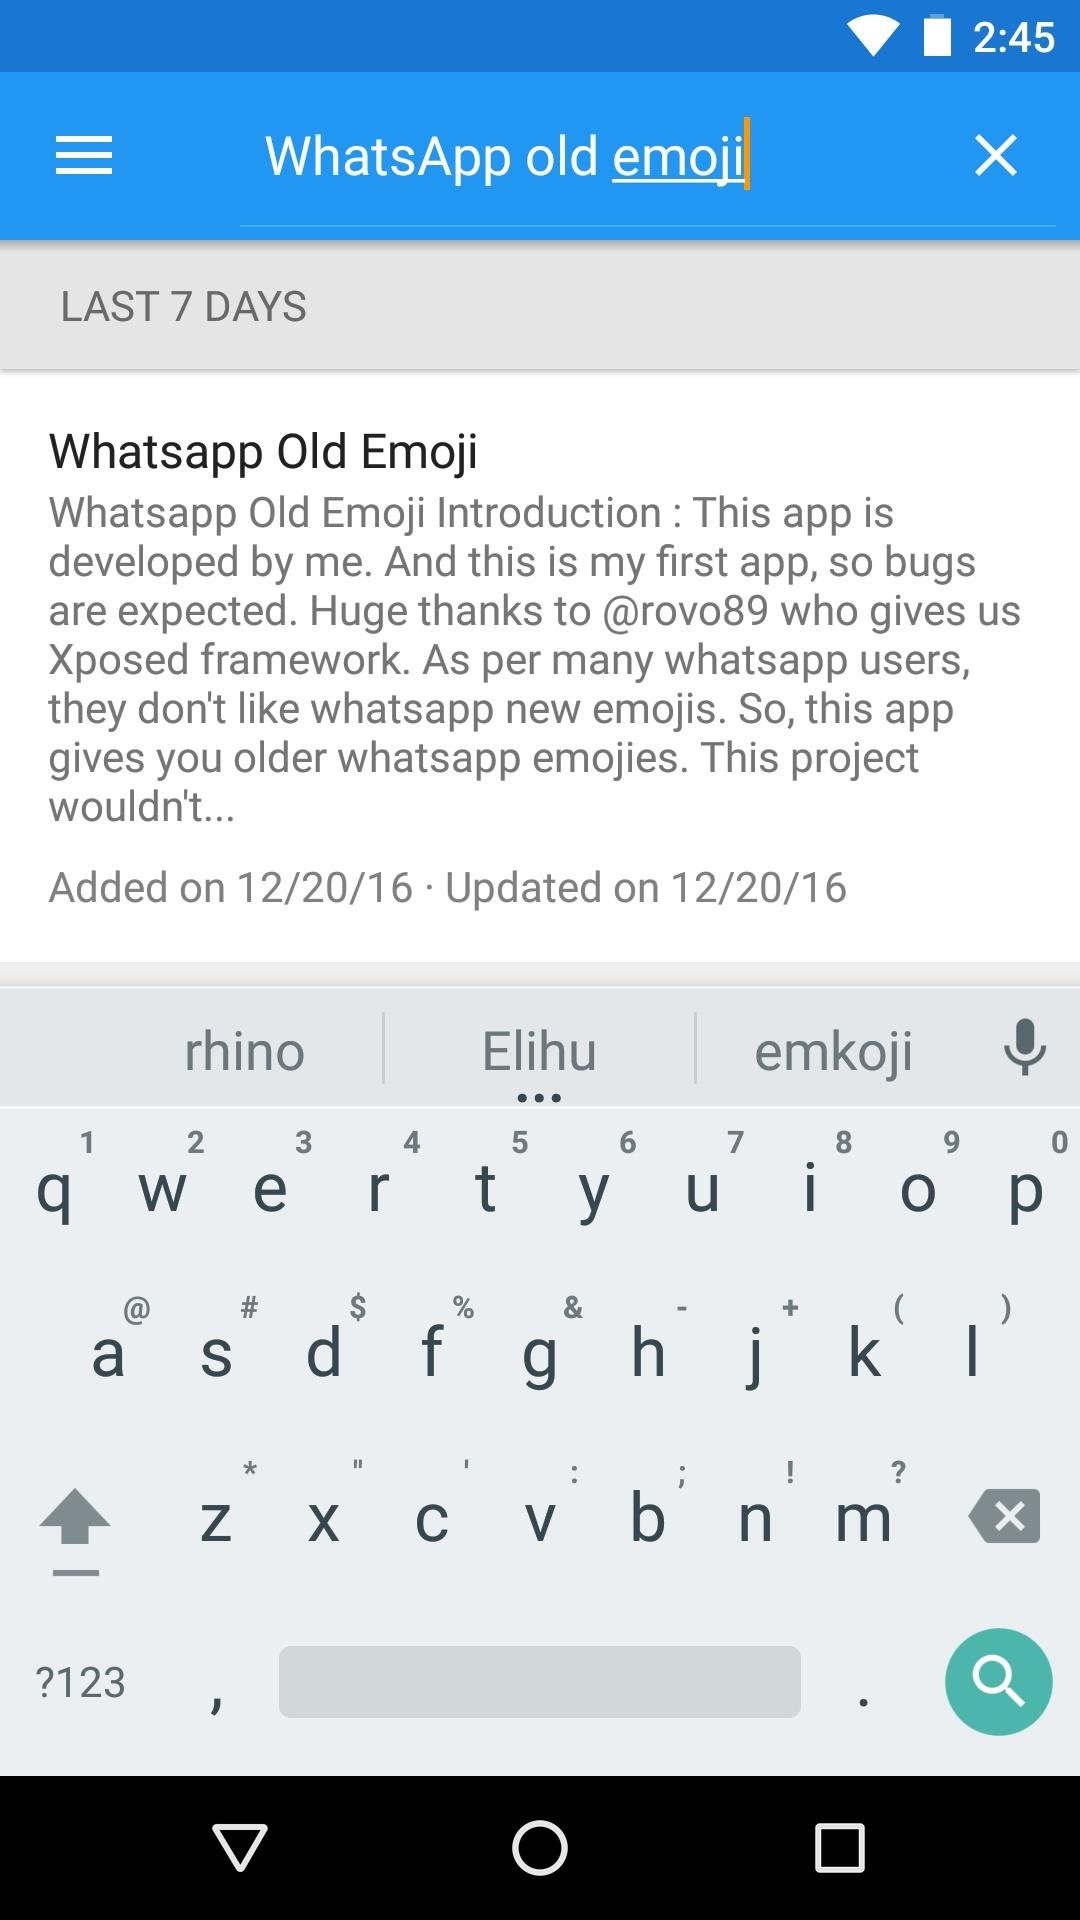 Bring Back WhatsApp's Old Emojis on Android